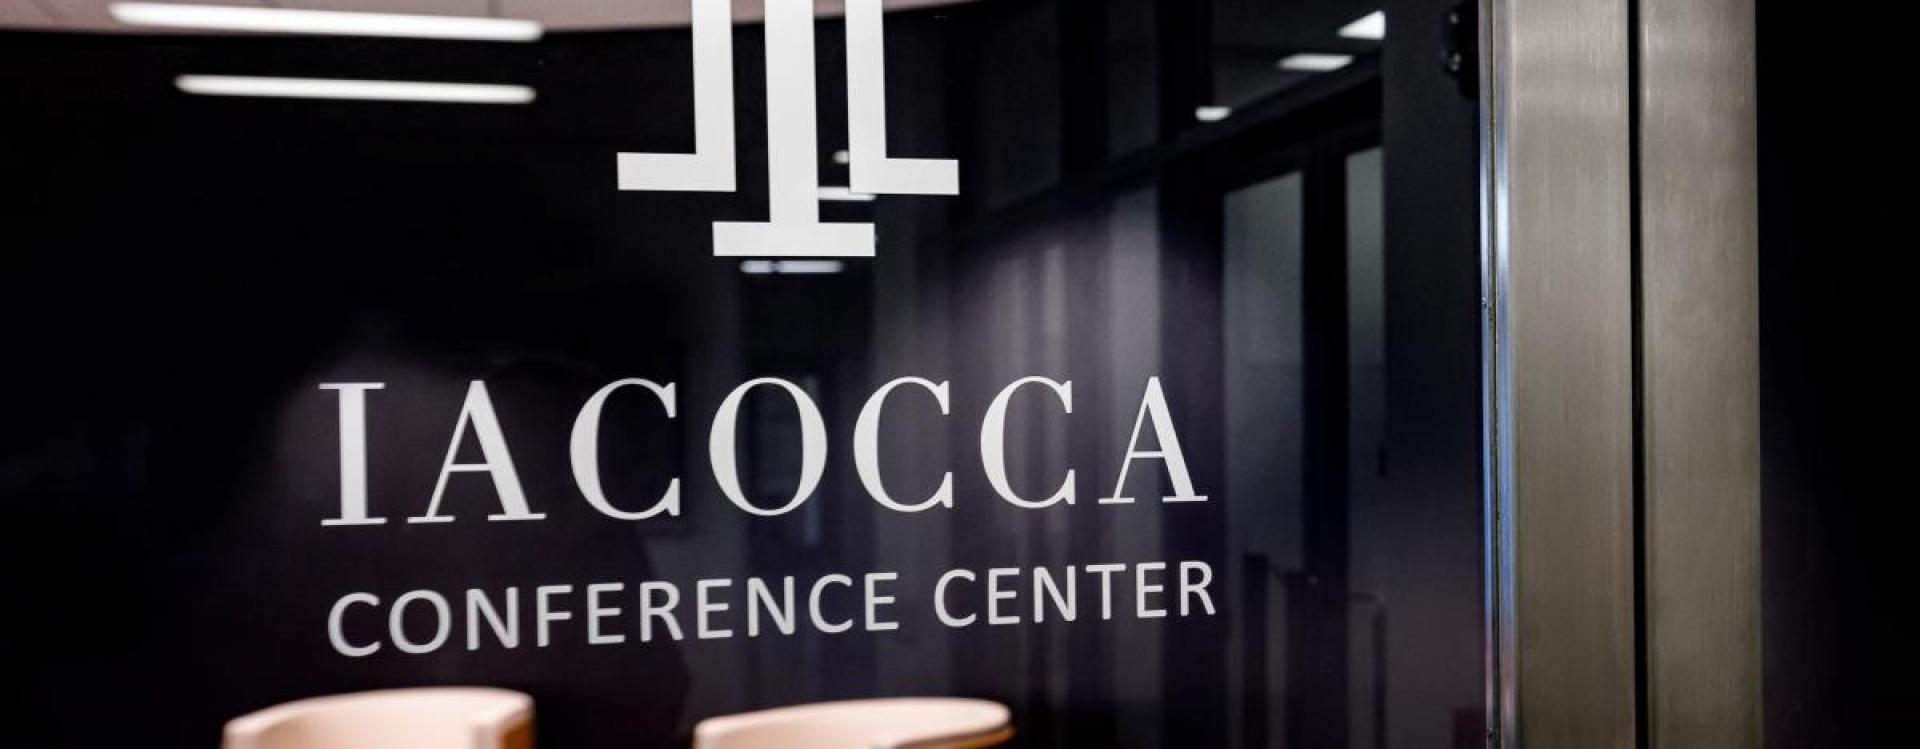 Iacocca Conference Center